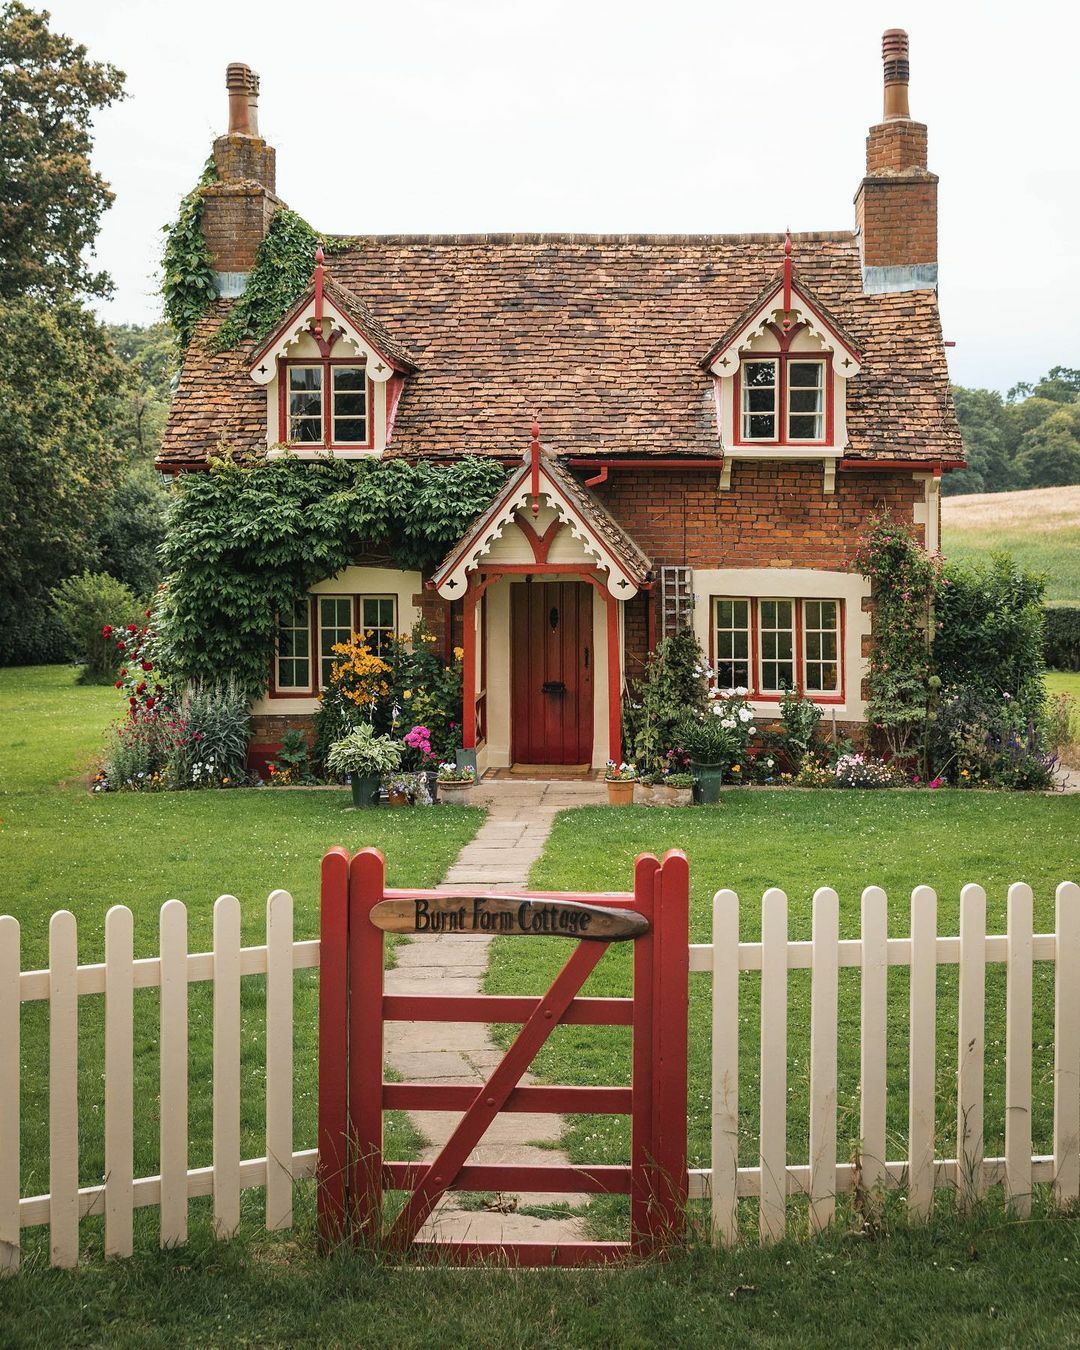 The Burnt Farm Cottage Was Built With Red Brick In The 1840s, Borough Of Broxbourne, Hertfordshire, Southern England